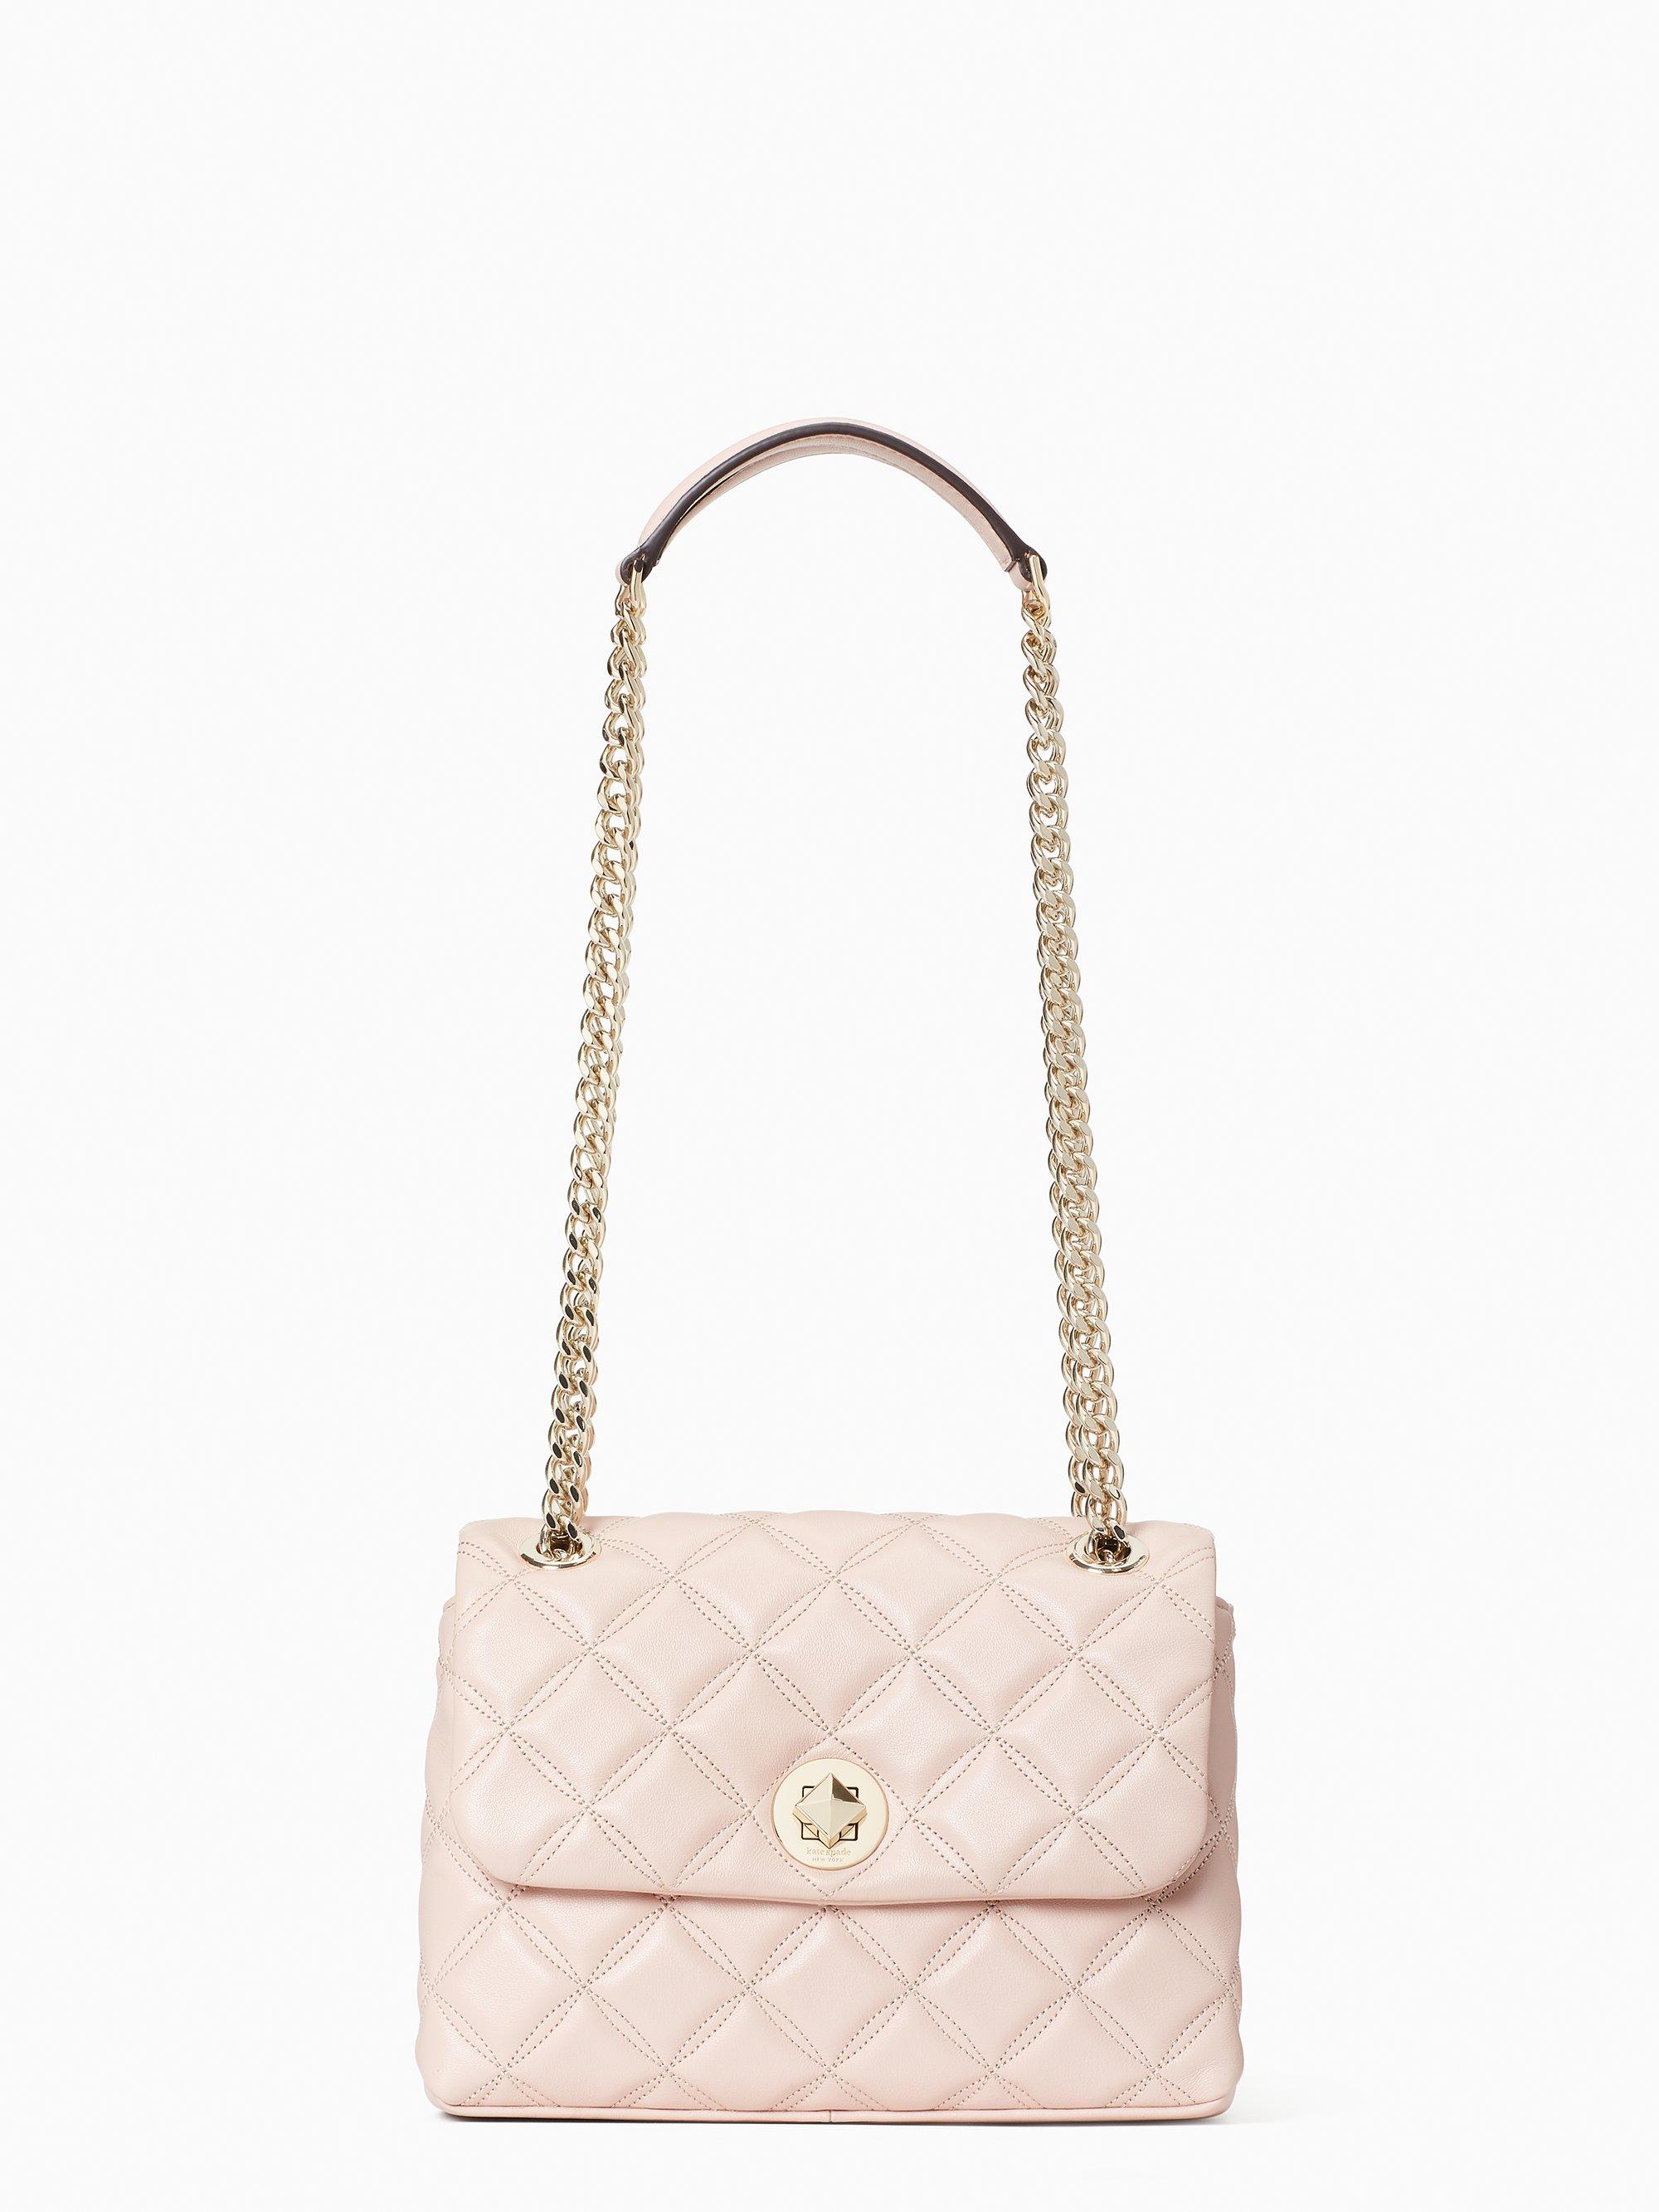 Kate Spade Leather Natalia Small Flap Crossbody in Rose Smoke (Pink) - Lyst